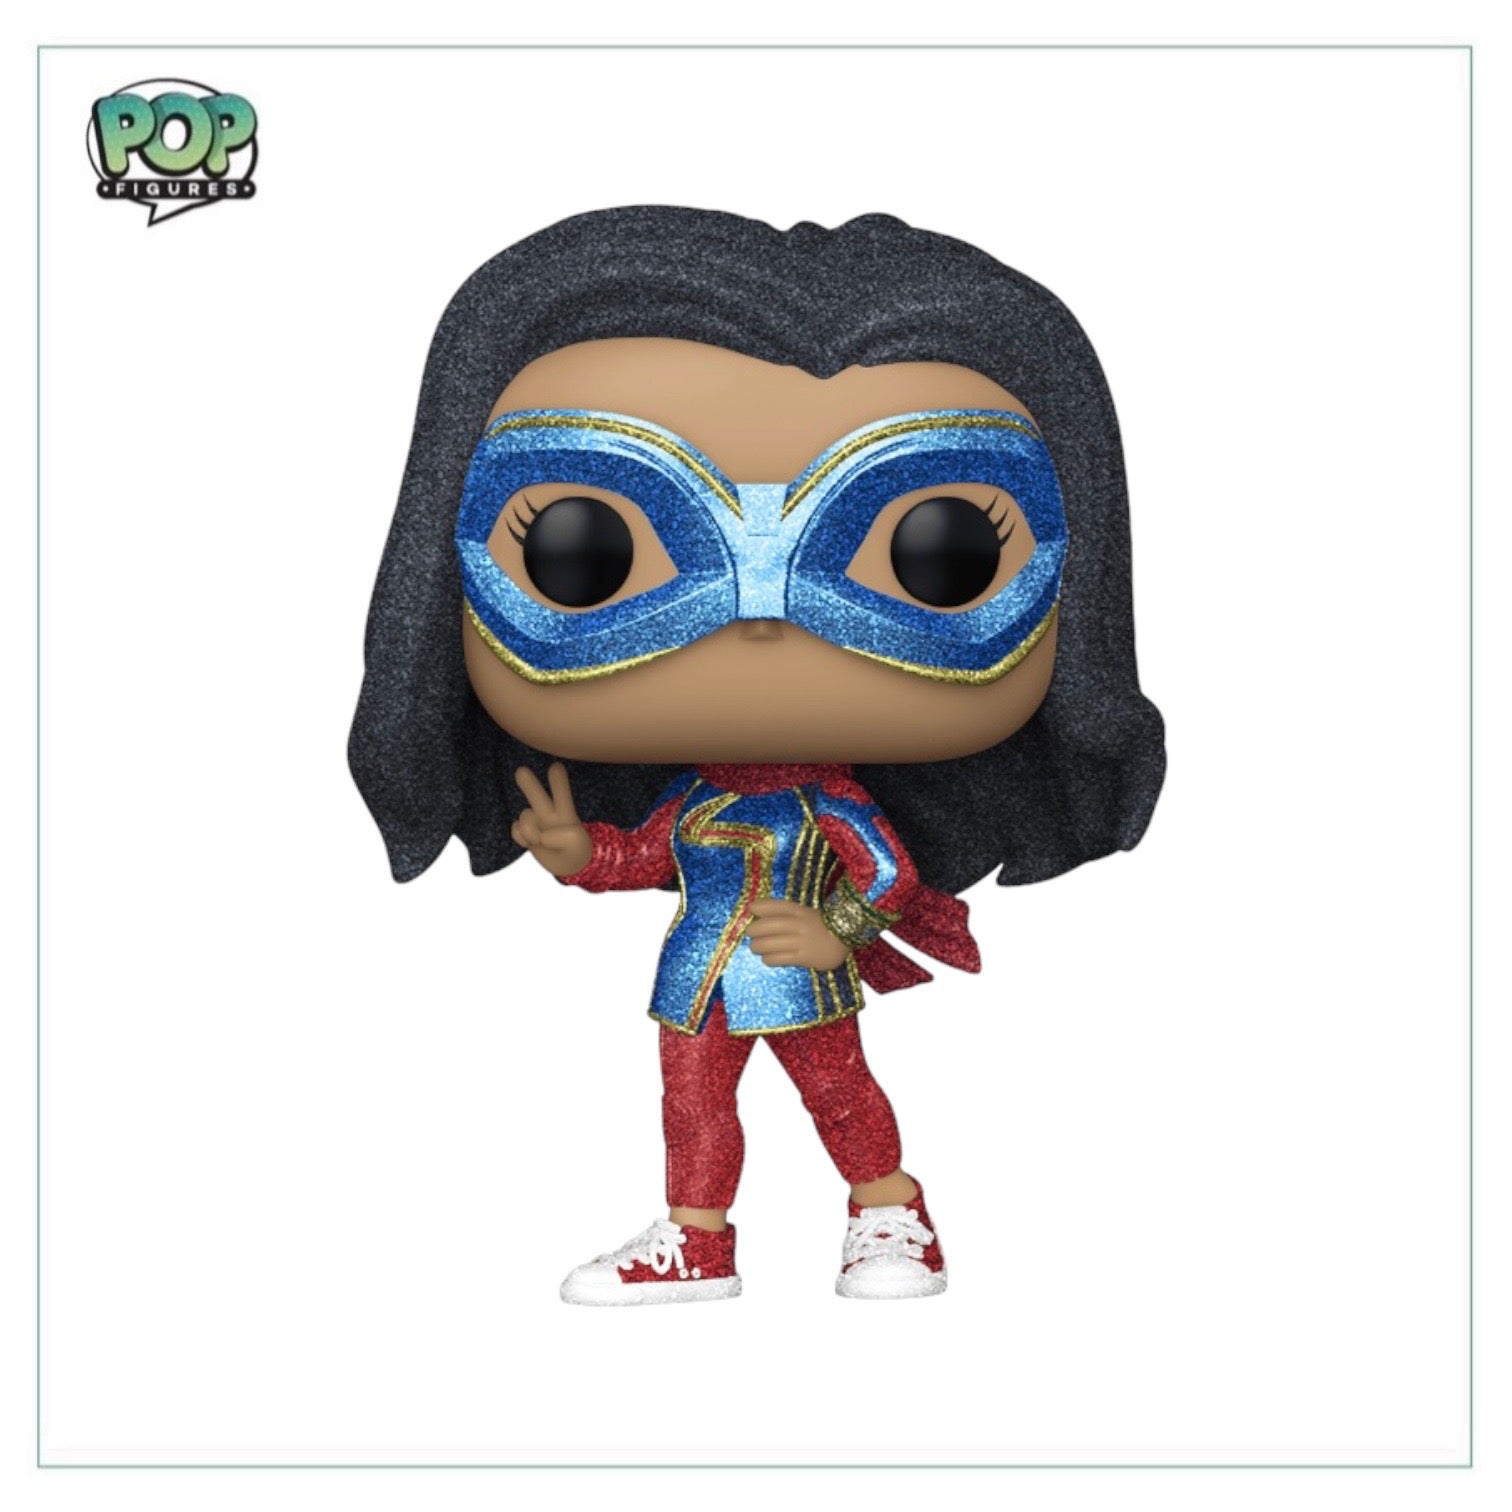 Ms. Marvel #1077 (Diamond Collection) Funko Pop! - Ms. Marvel - Hot Topic Exclusive